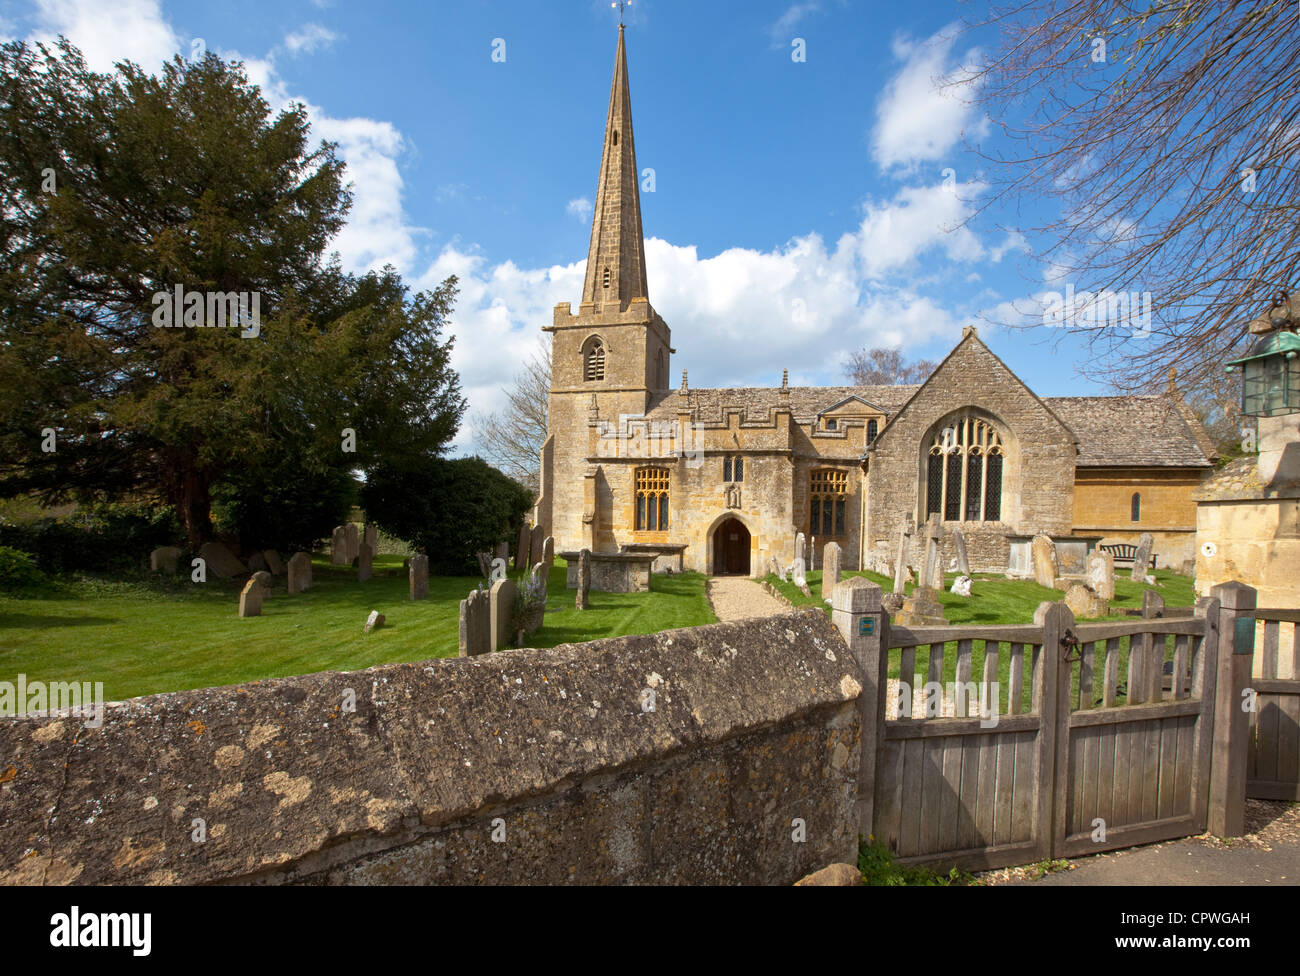 Church of St Michael and All Angels, Stanton, The Cotswolds, Gloucestershire, England, UK Stock Photo